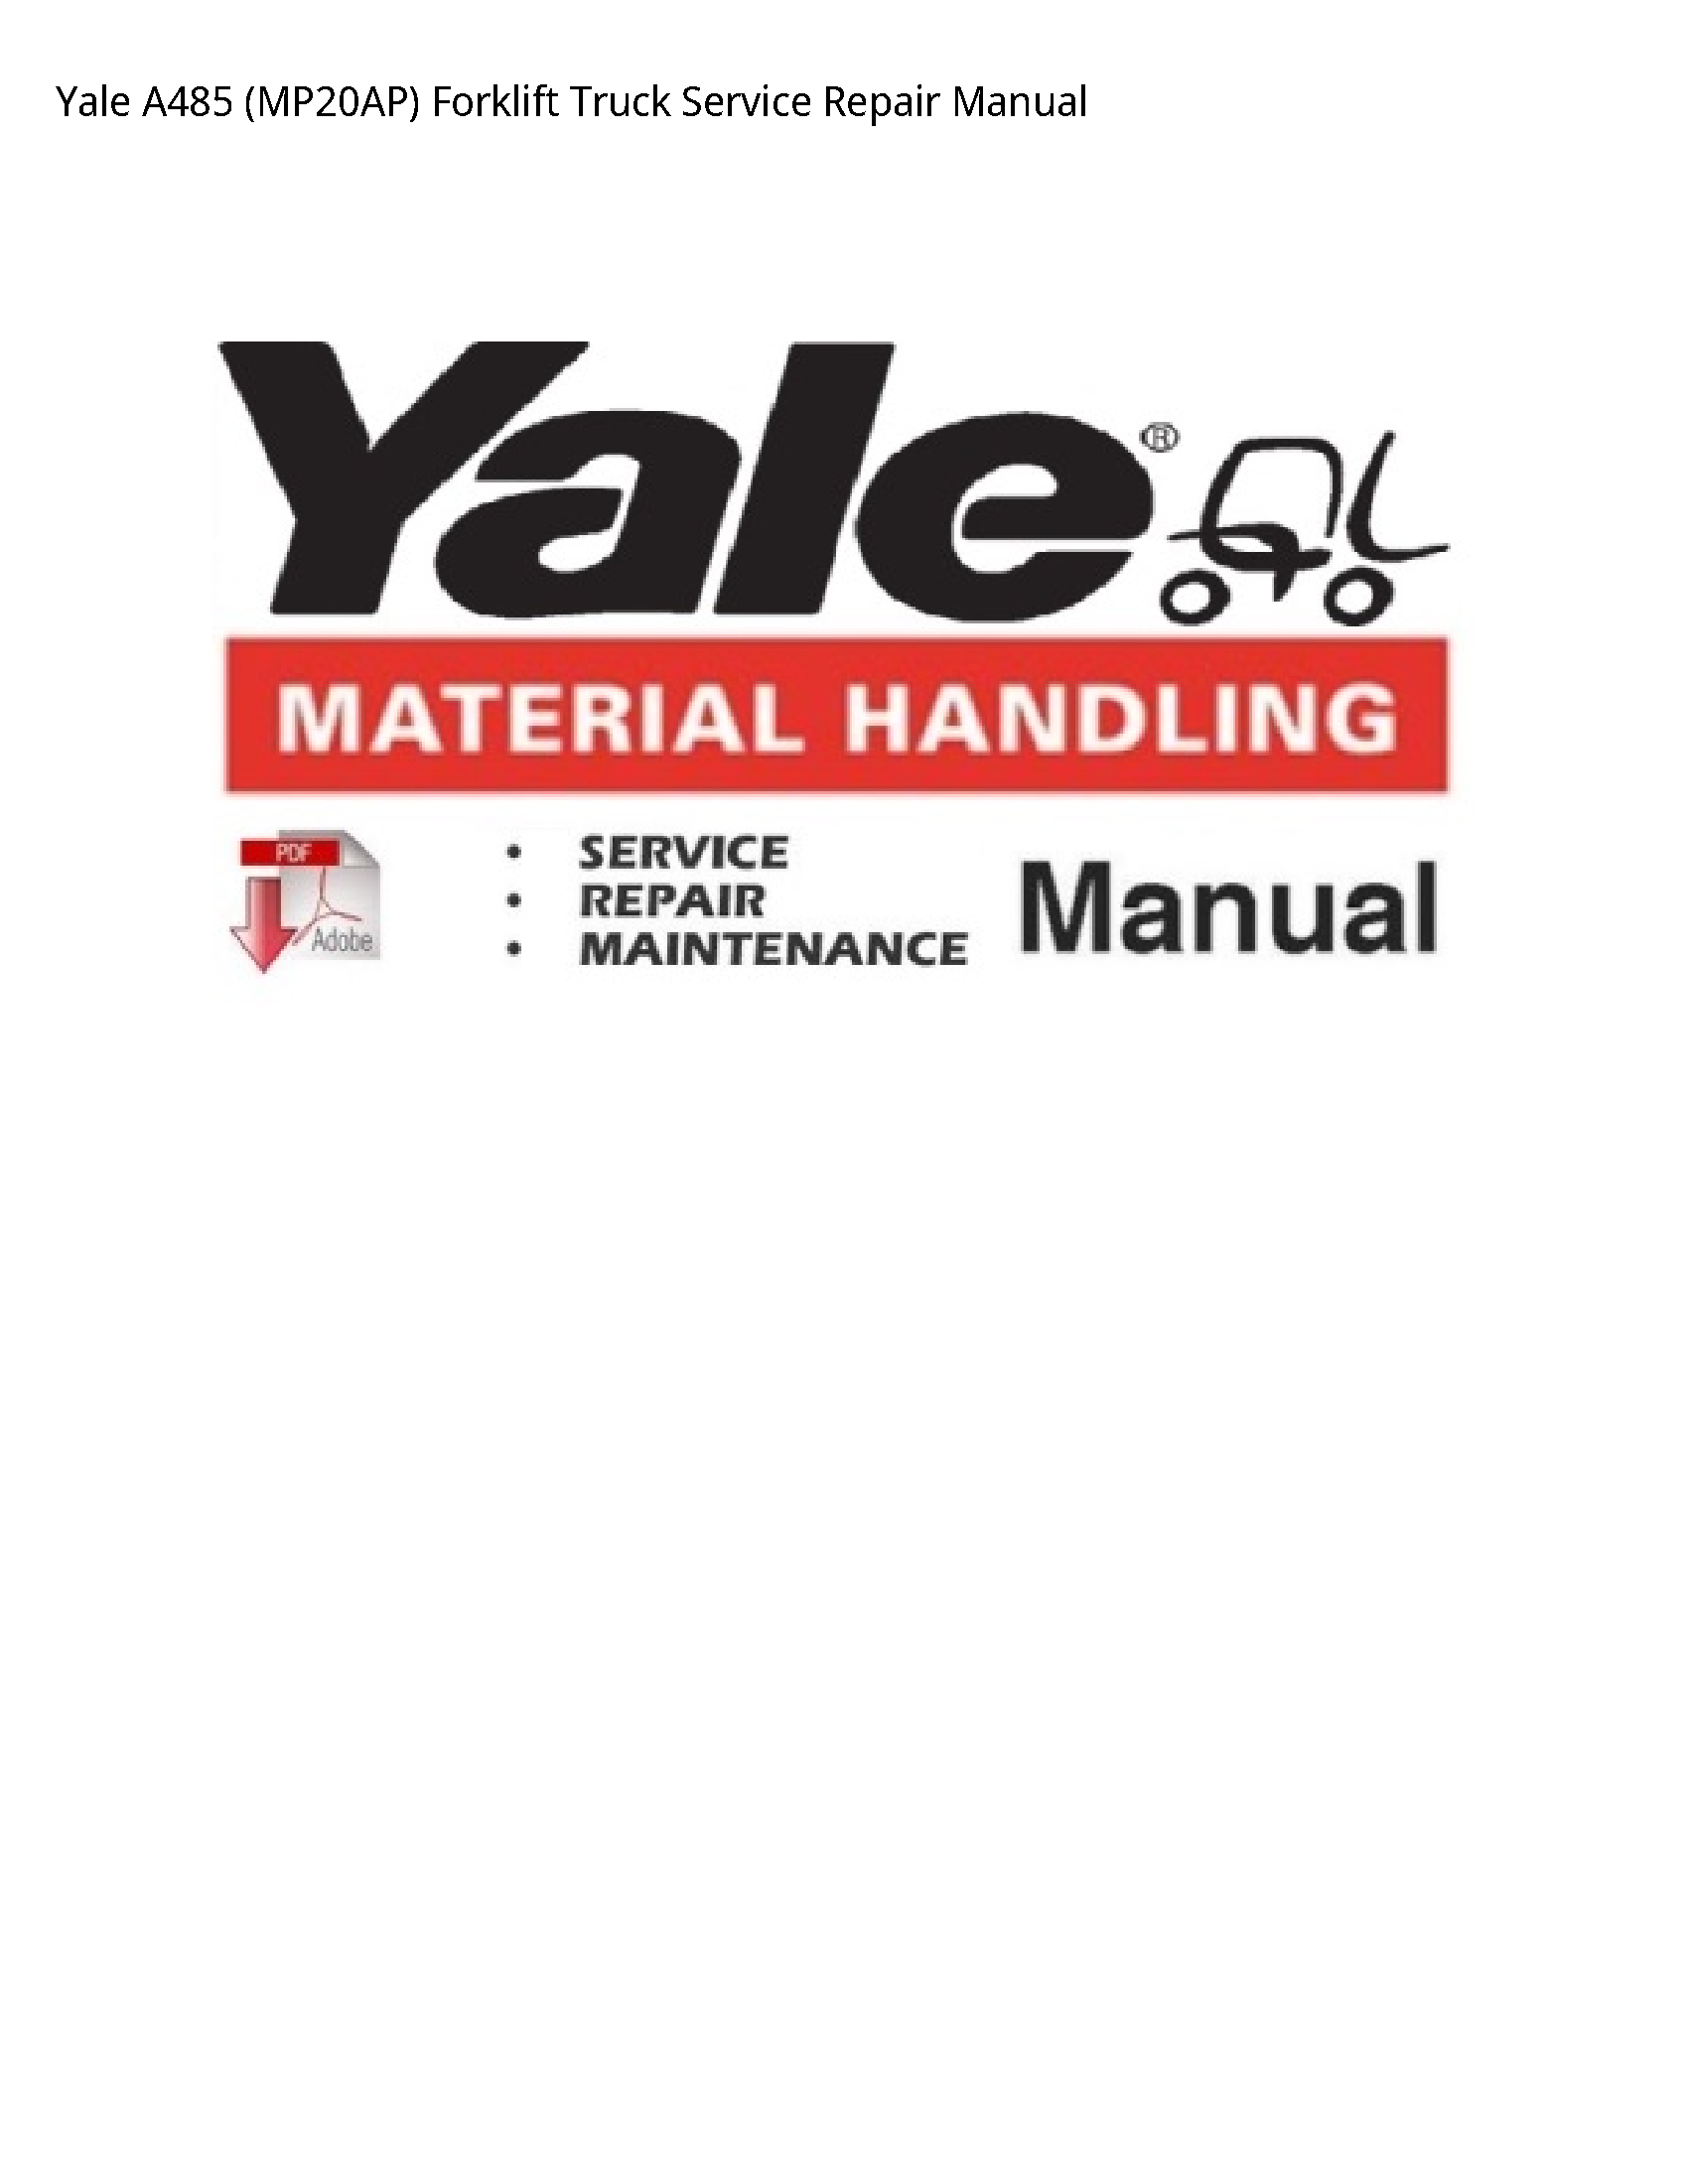 Yale A485 Forklift Truck manual